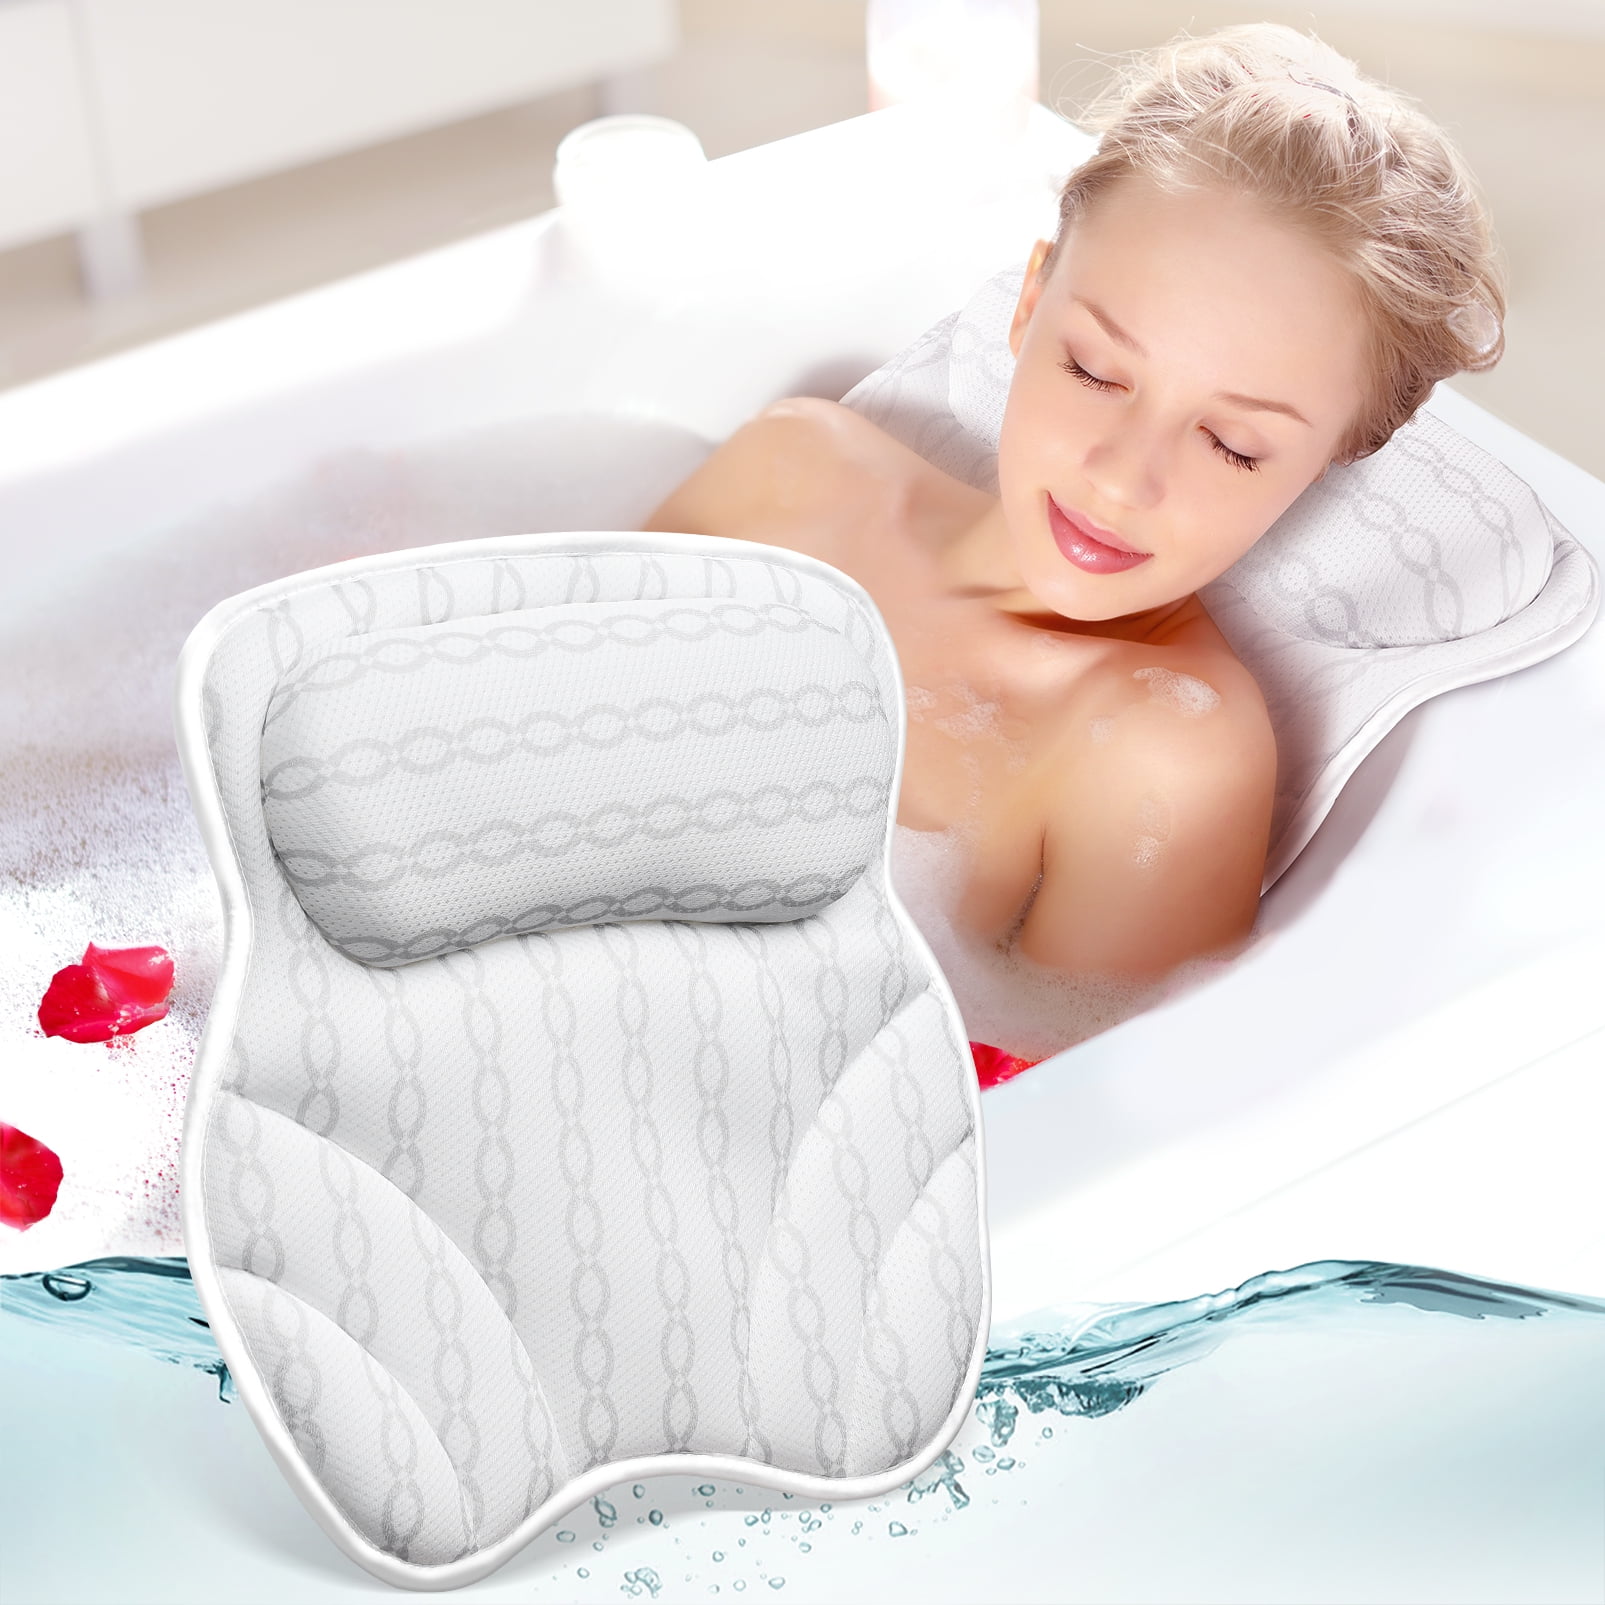 Bath Accessories for Women & Men Ergonomic Bath Pillows for Relaxation for Tub Neck and Back Support Poweul Suction Cups Black Bath Pillow Bathtub Pillow Spa Pillow